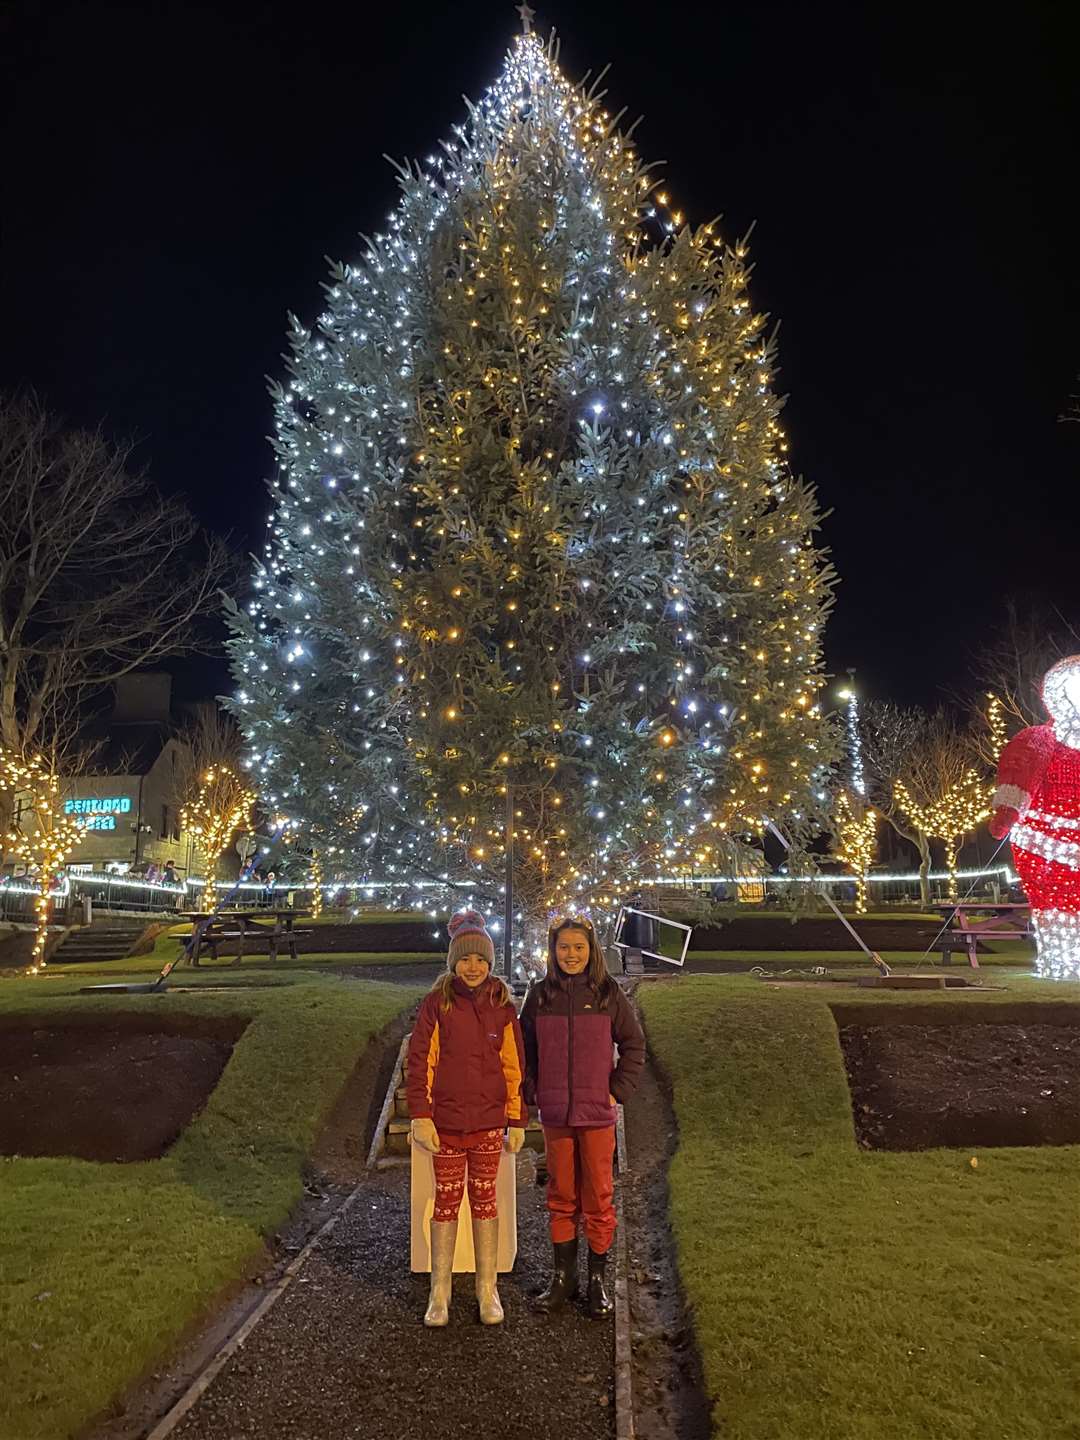 The lights were switched on by Chloe Rosie (right) and her friend Amy Andrews.